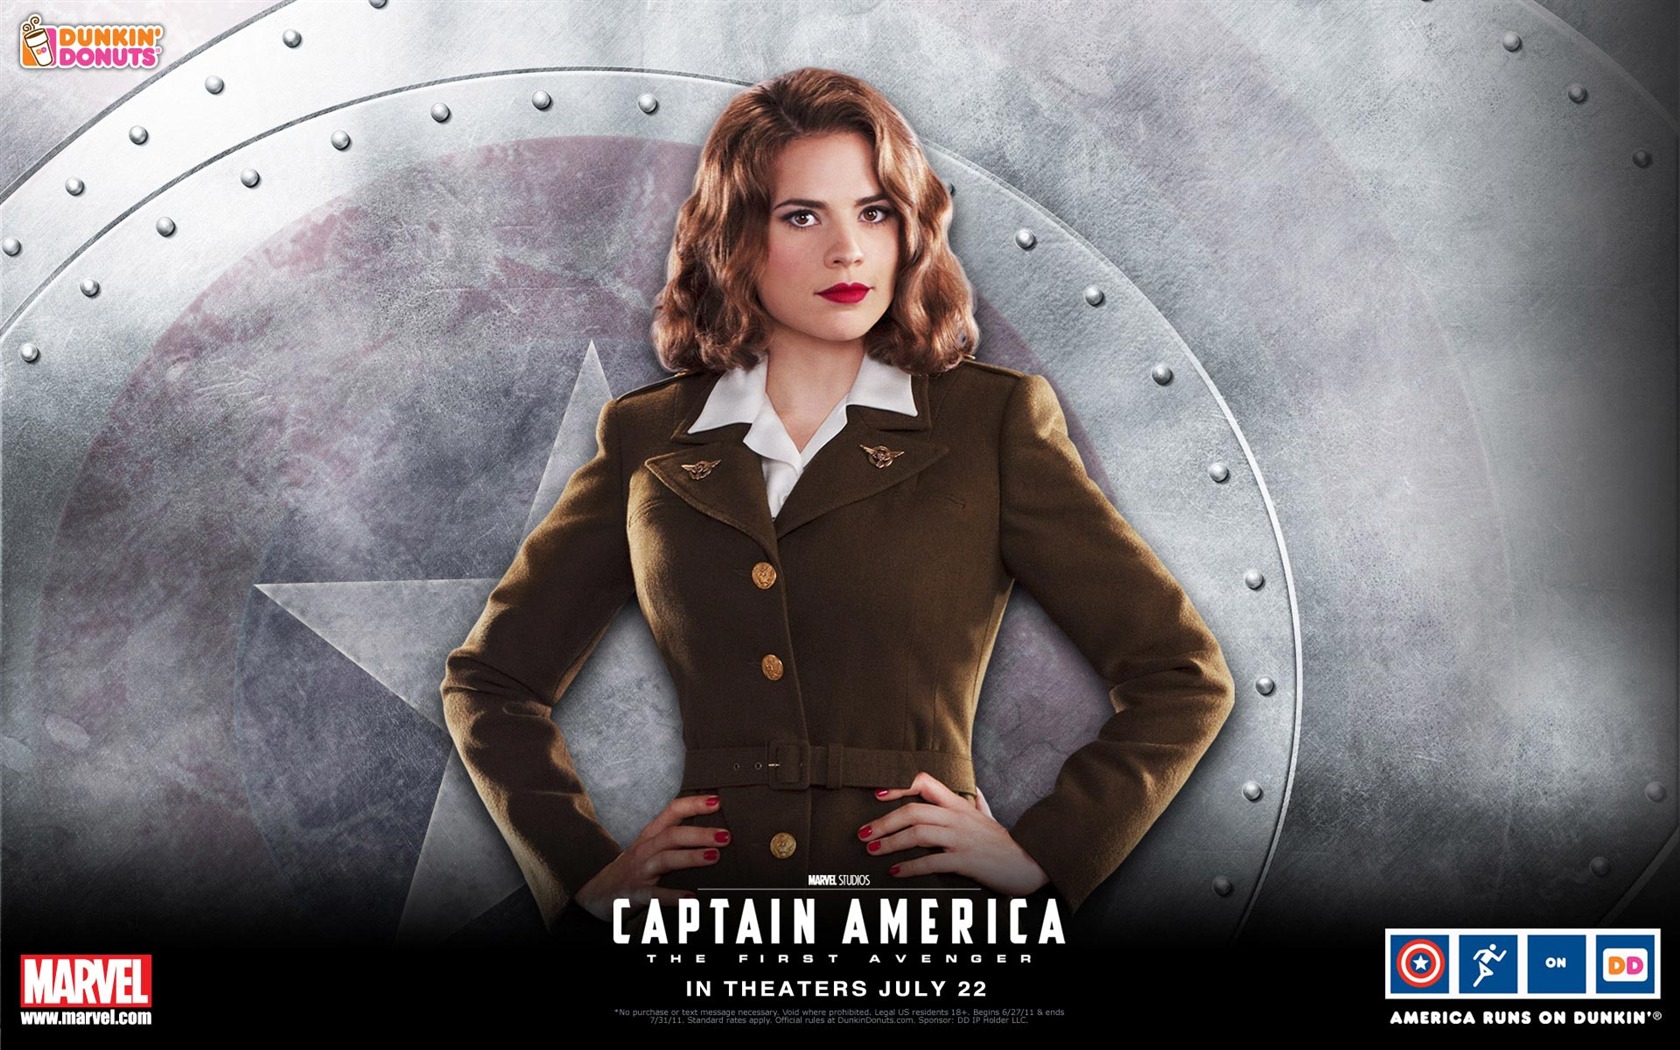 Captain America: The First Avenger wallpapers HD #8 - 1680x1050